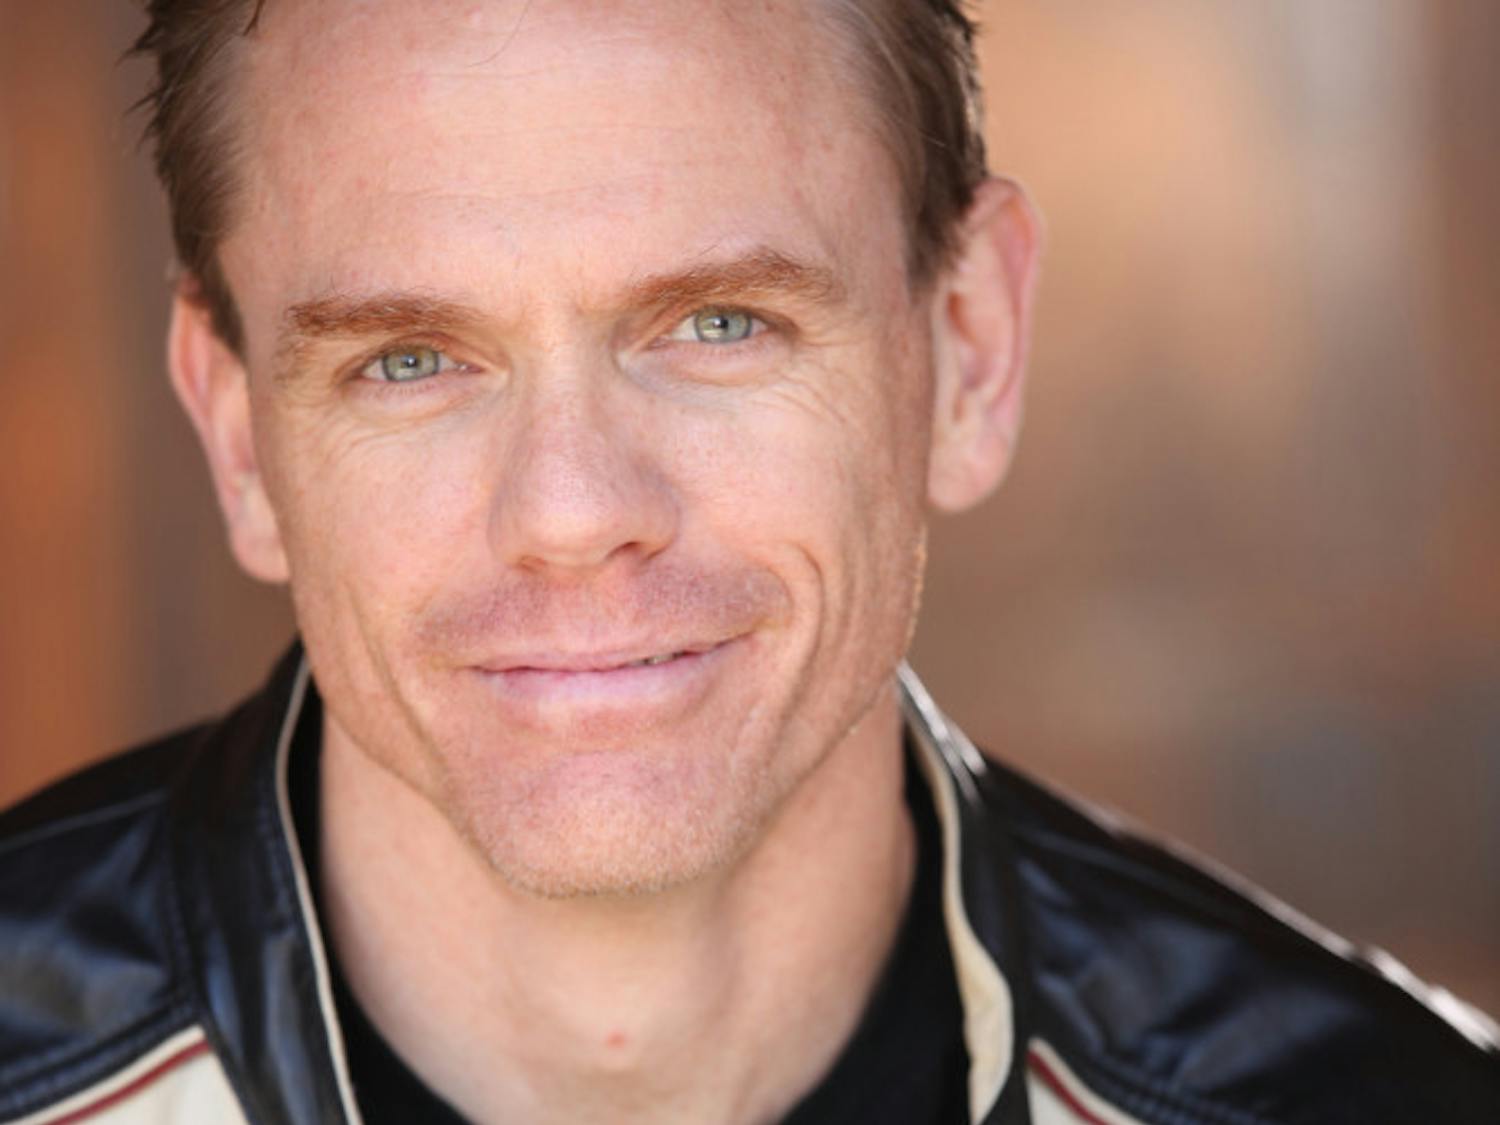 Christopher Titus has taken his life and turned it into a comedy skit. The comedian will perform at 8 p.m. on Friday at the University Auditorium.